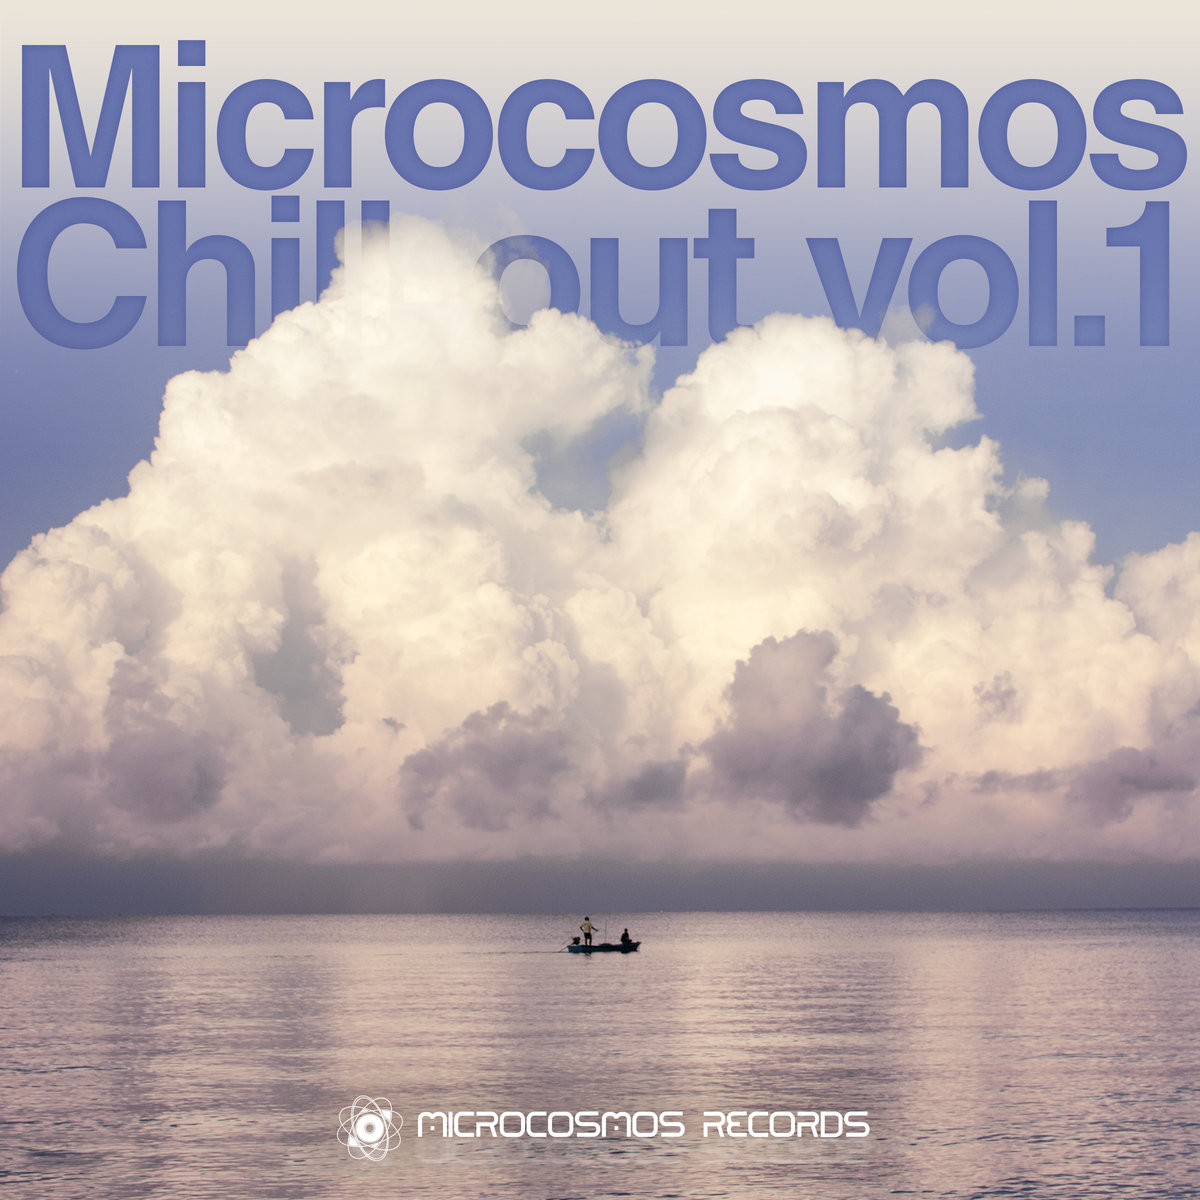 Gaiana - Liquid Safari @ 'Various Artists - Microcosmos Chill-out Vol.1' album (ambient, chill-out)